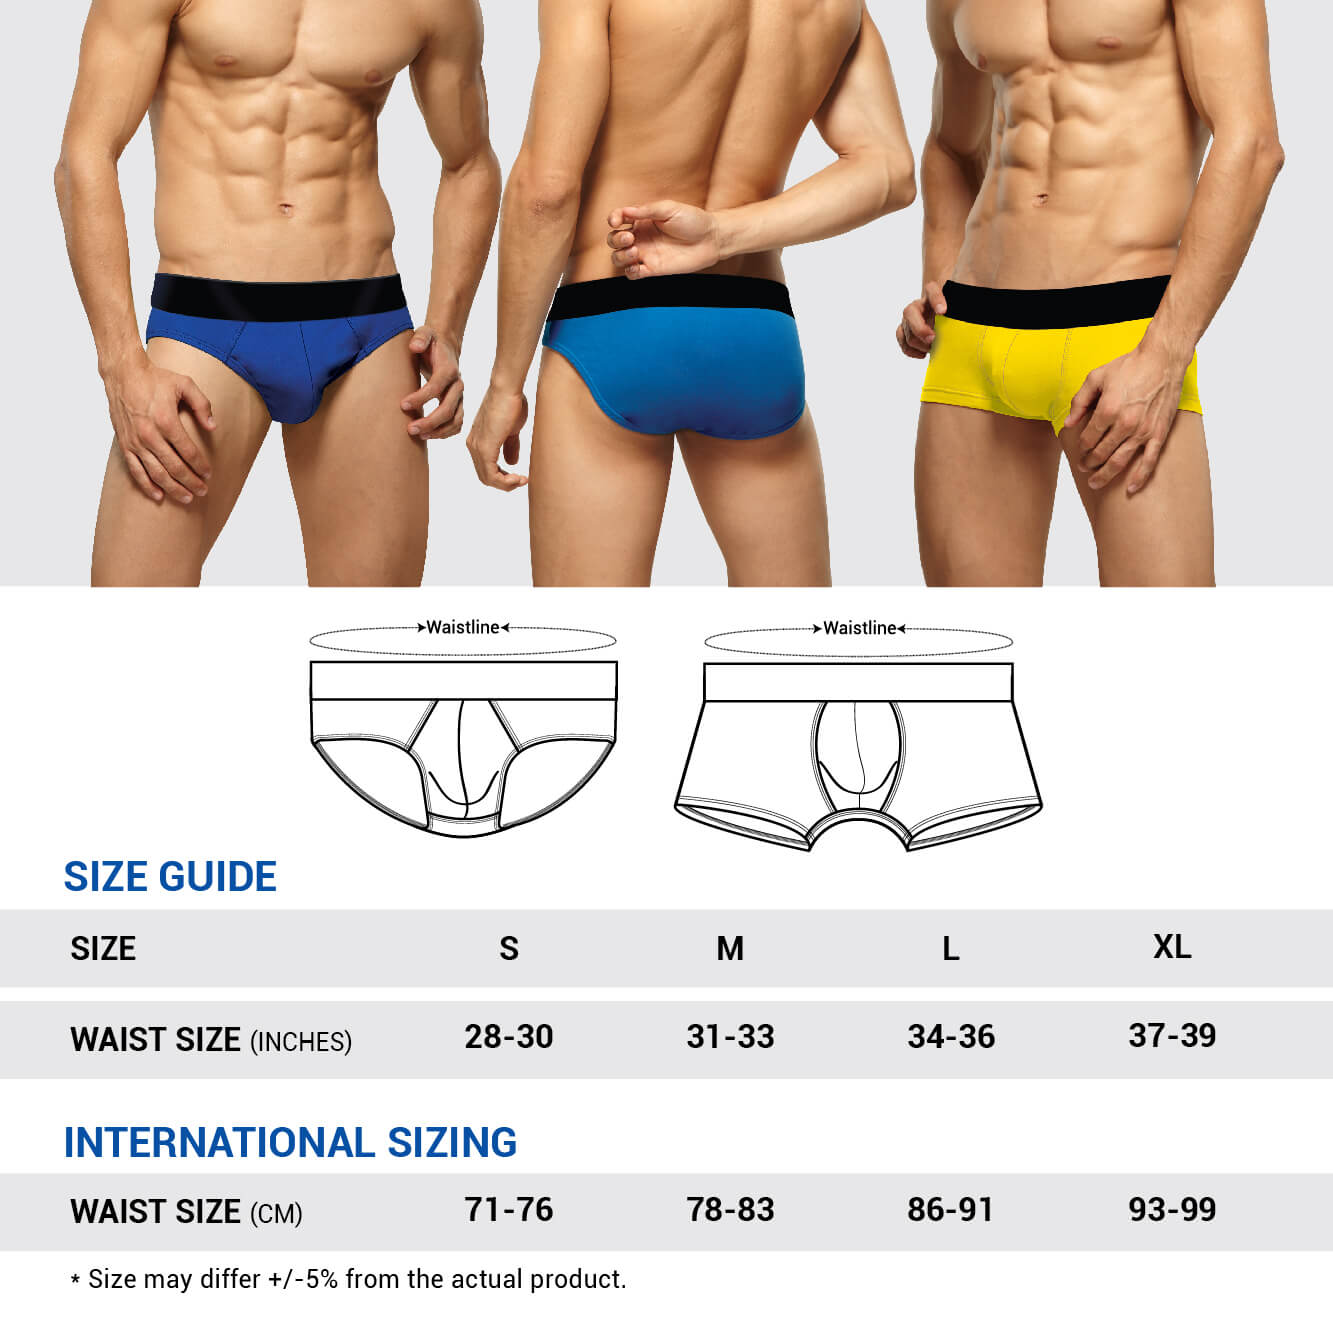 Briefs size chart in cm and inches